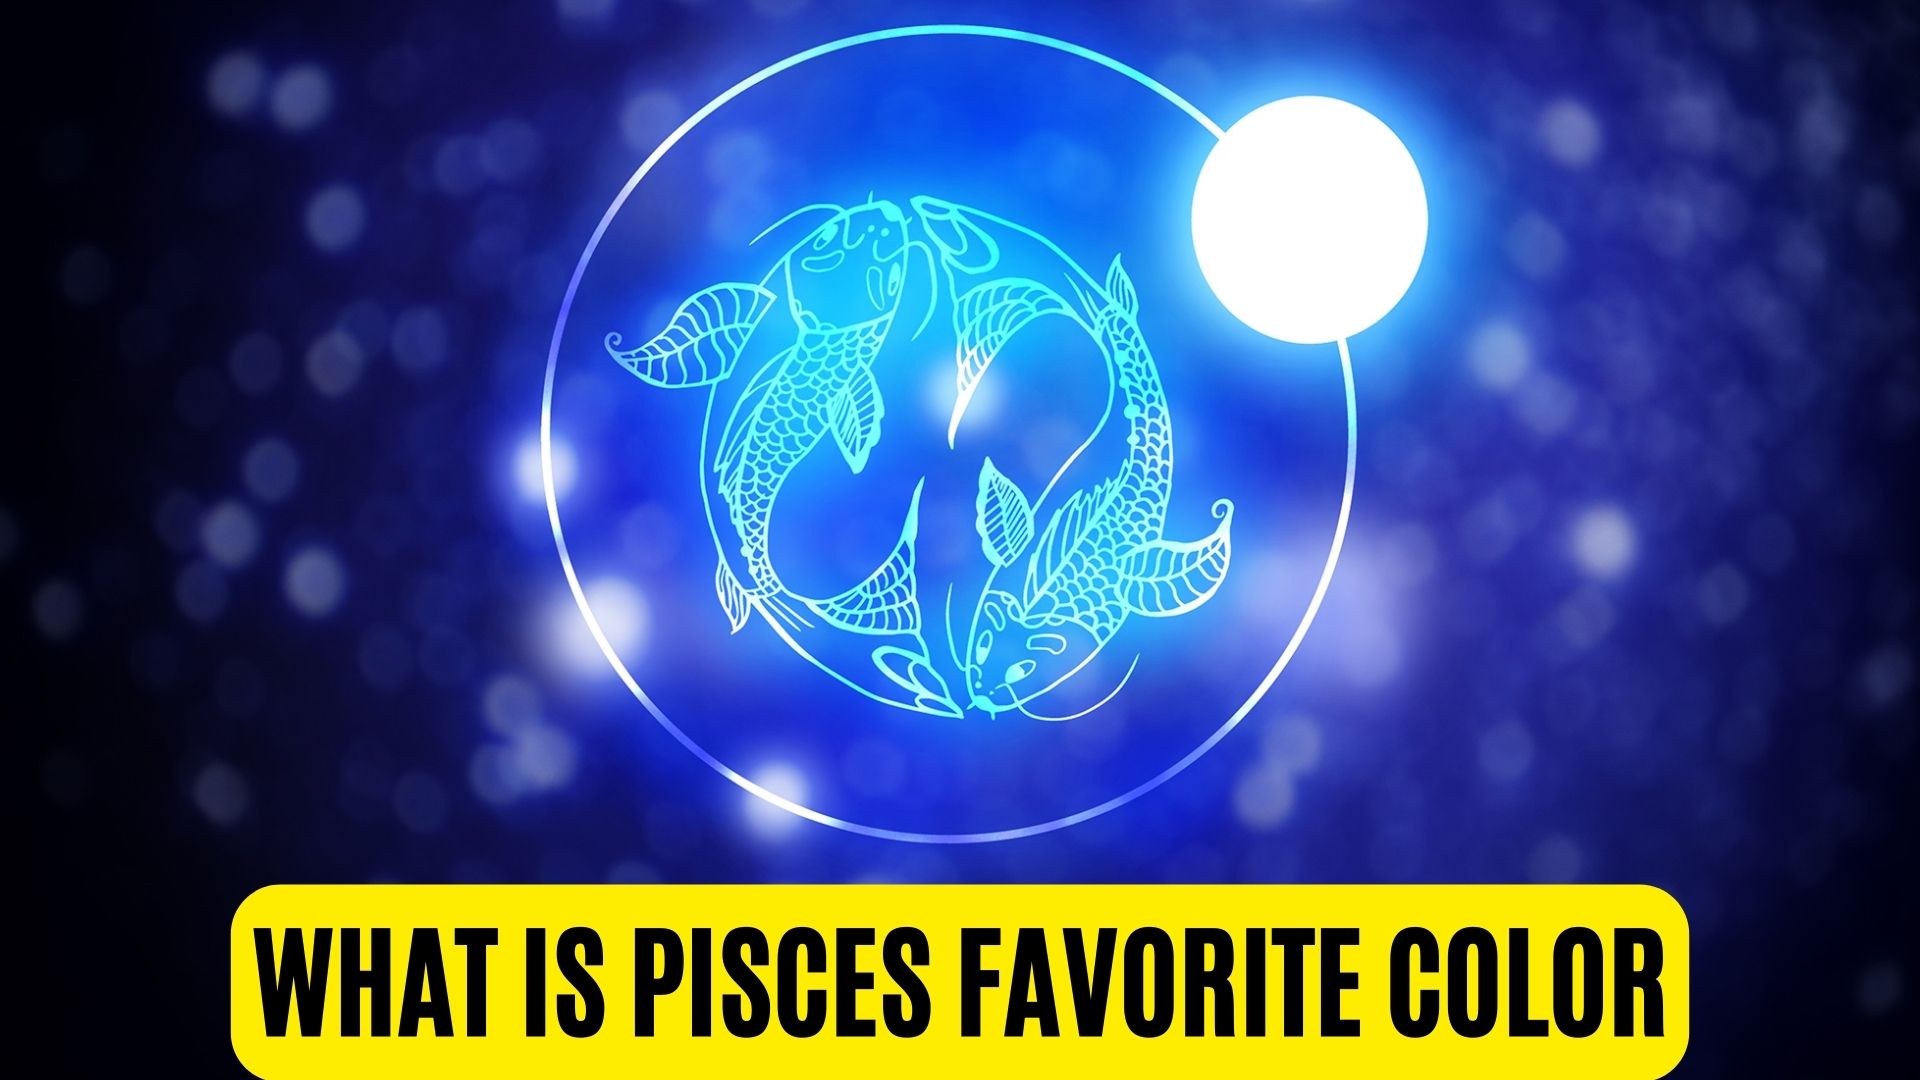 What Is Pisces Favorite Color?